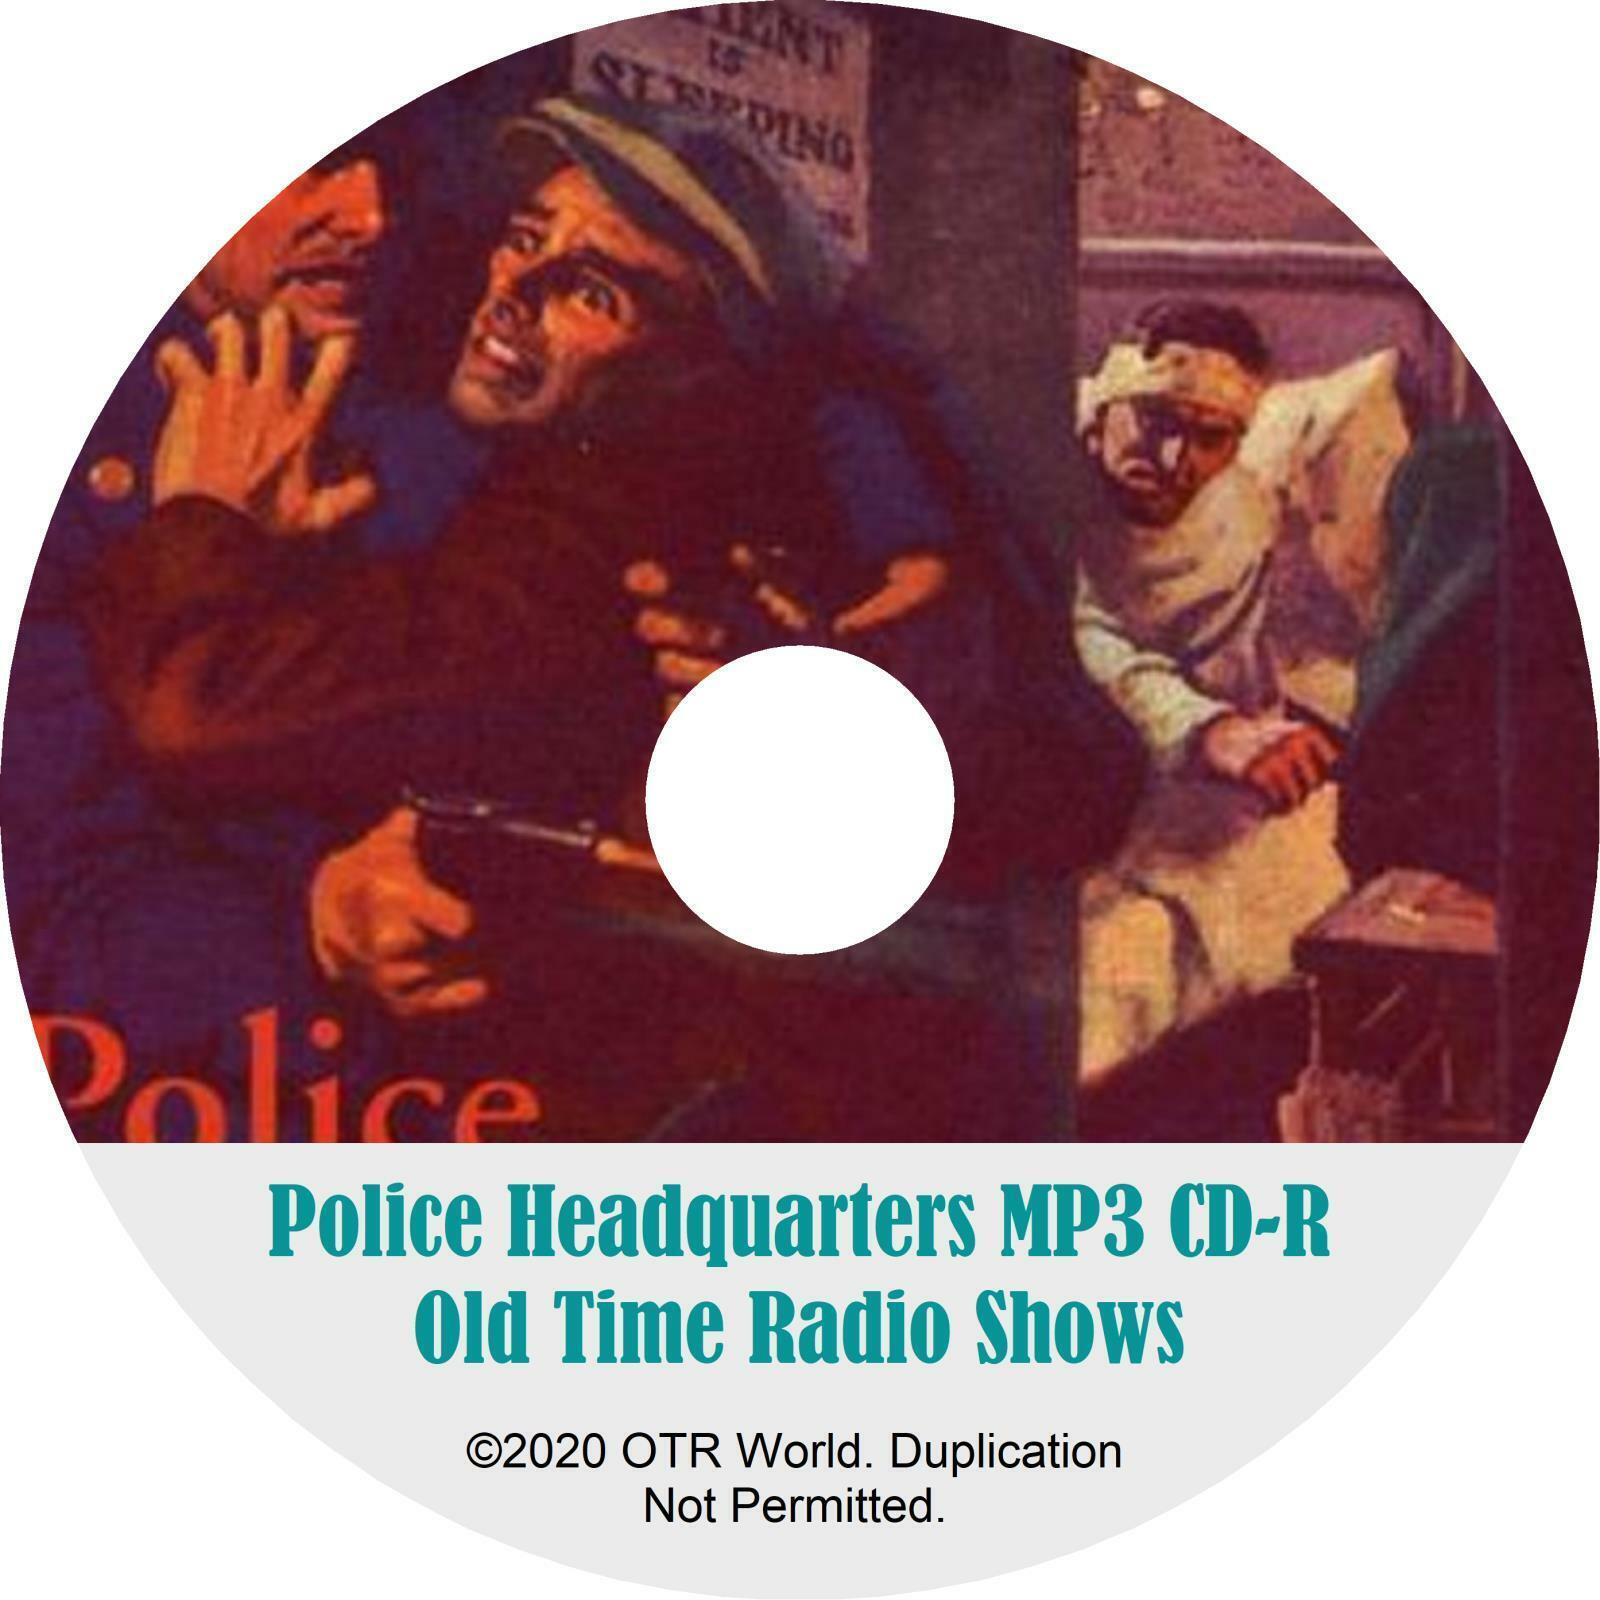 Police Headquarters OTR Old Time Radio Shows MP3 On CD 61 Episodes